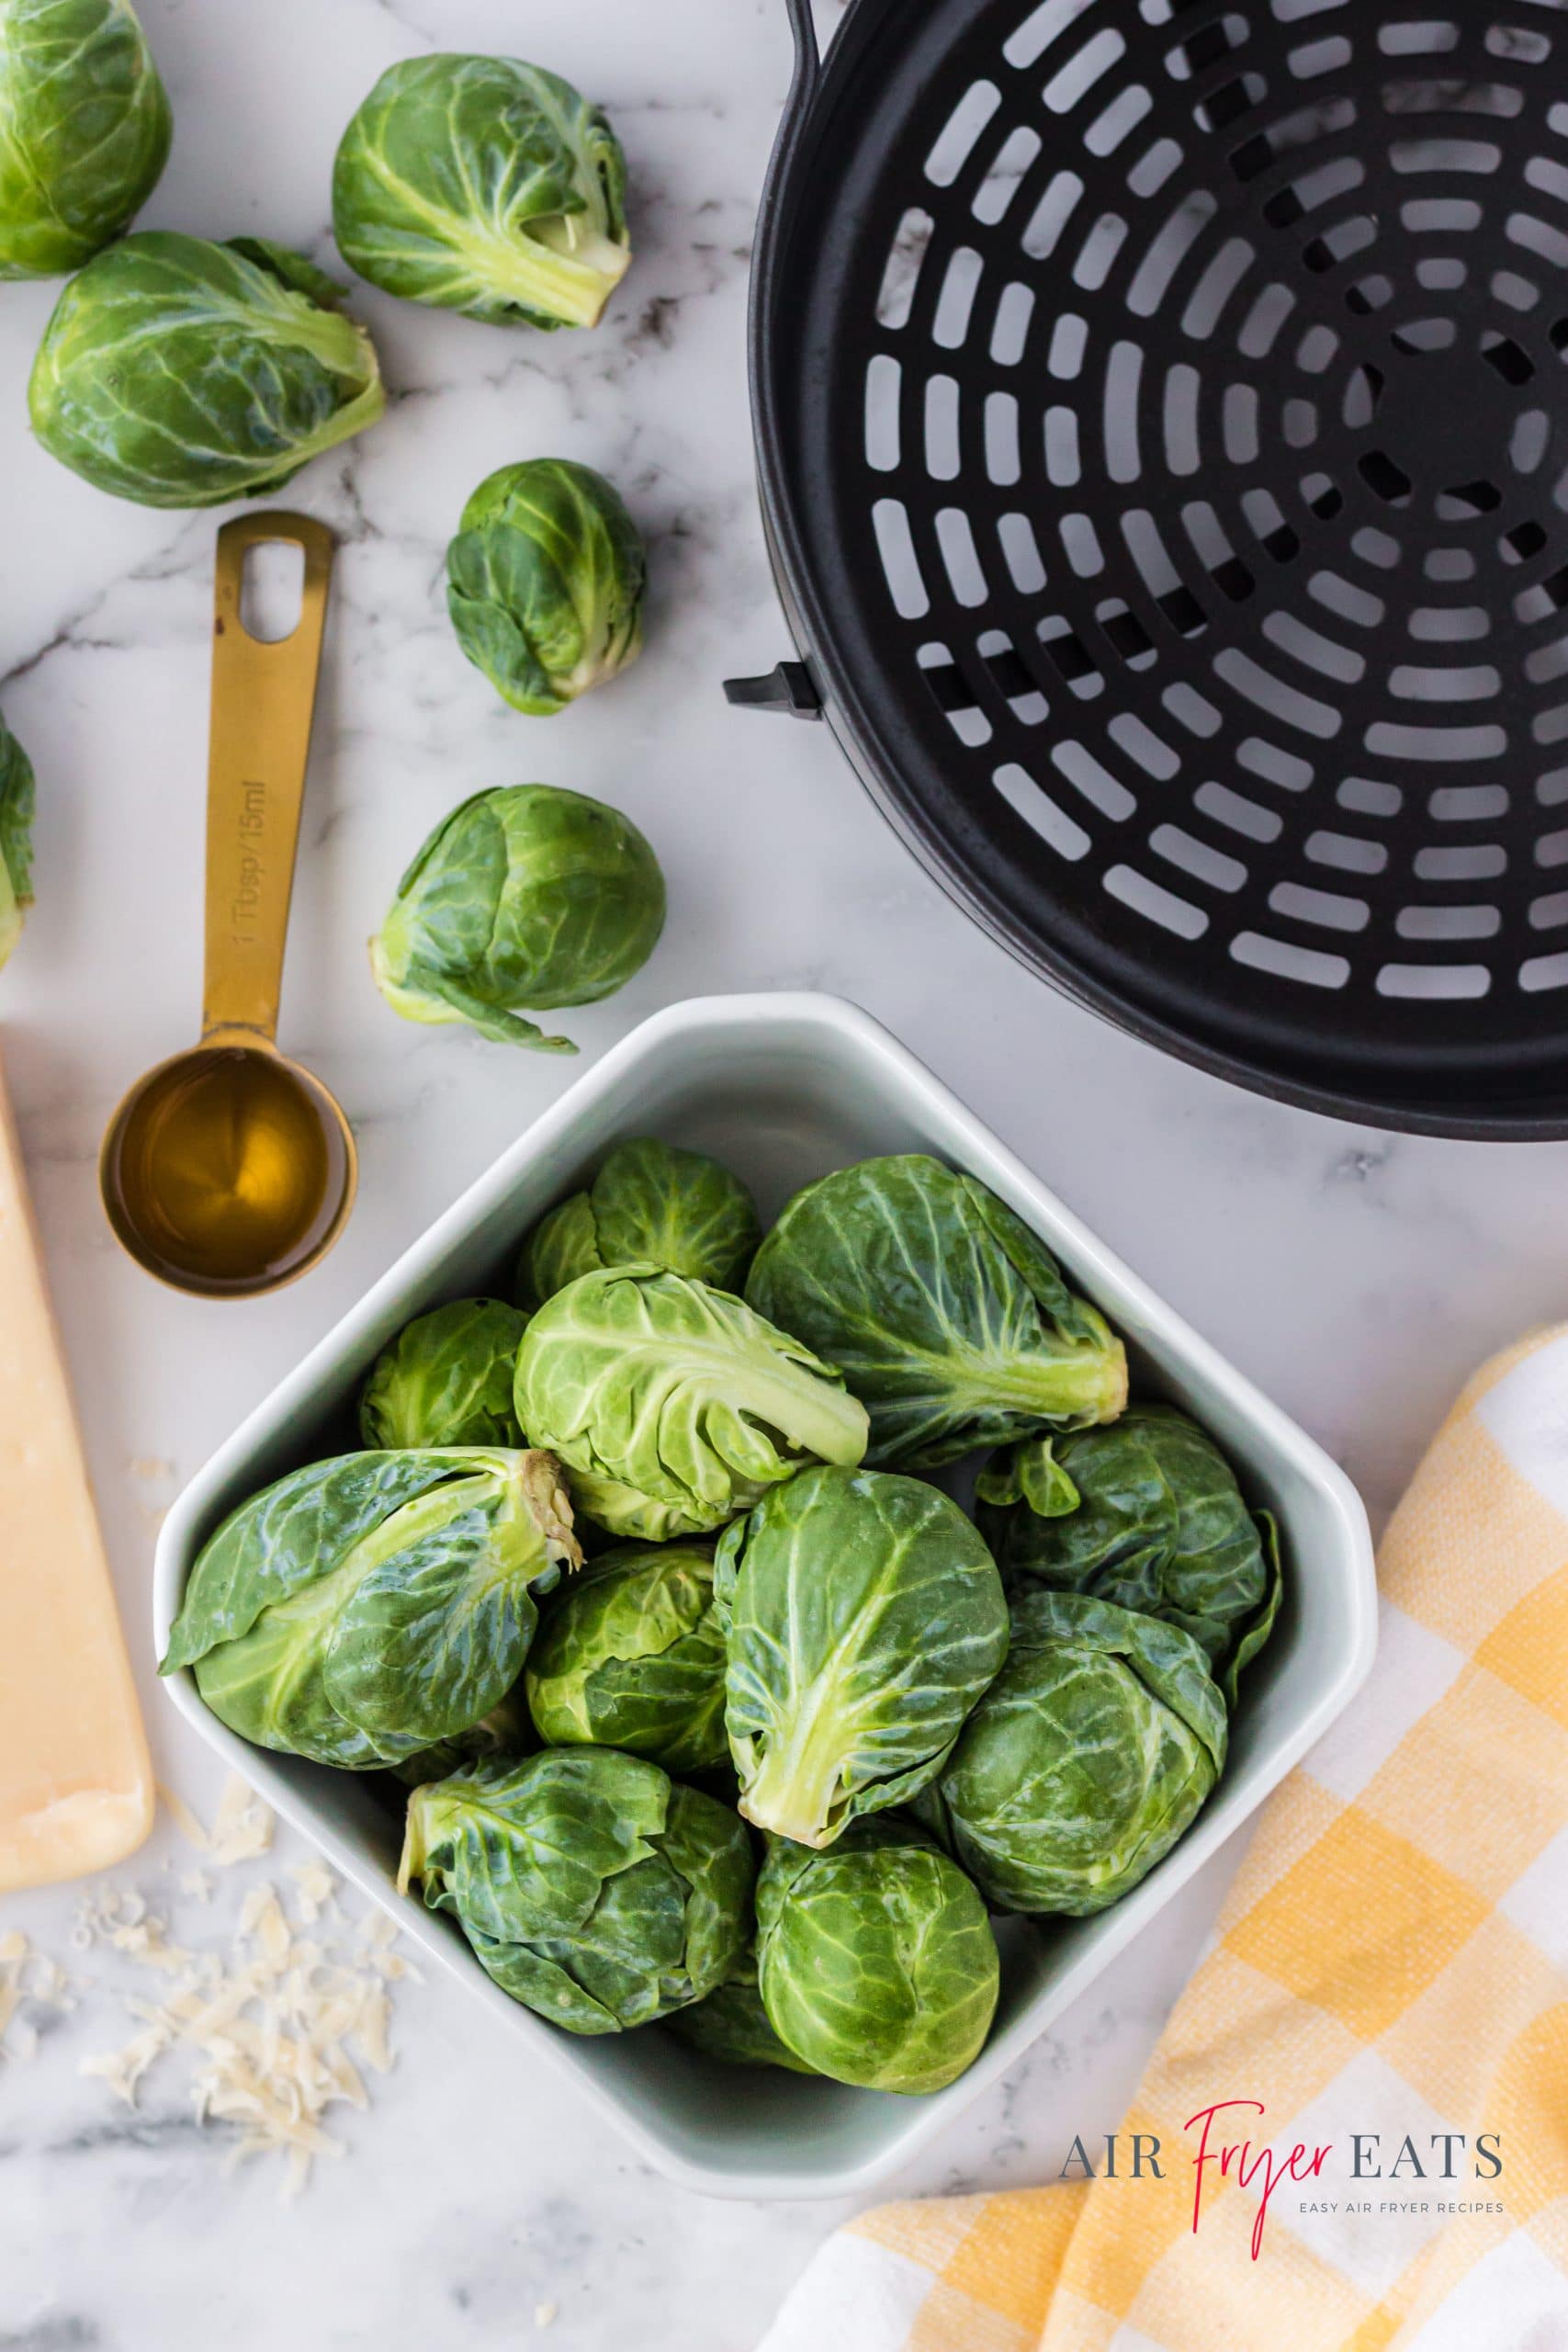 A square bowl of fresh raw brussel sprouts next to a gold tablespoon of oil and the air fryer basket for a Ninja Foodi